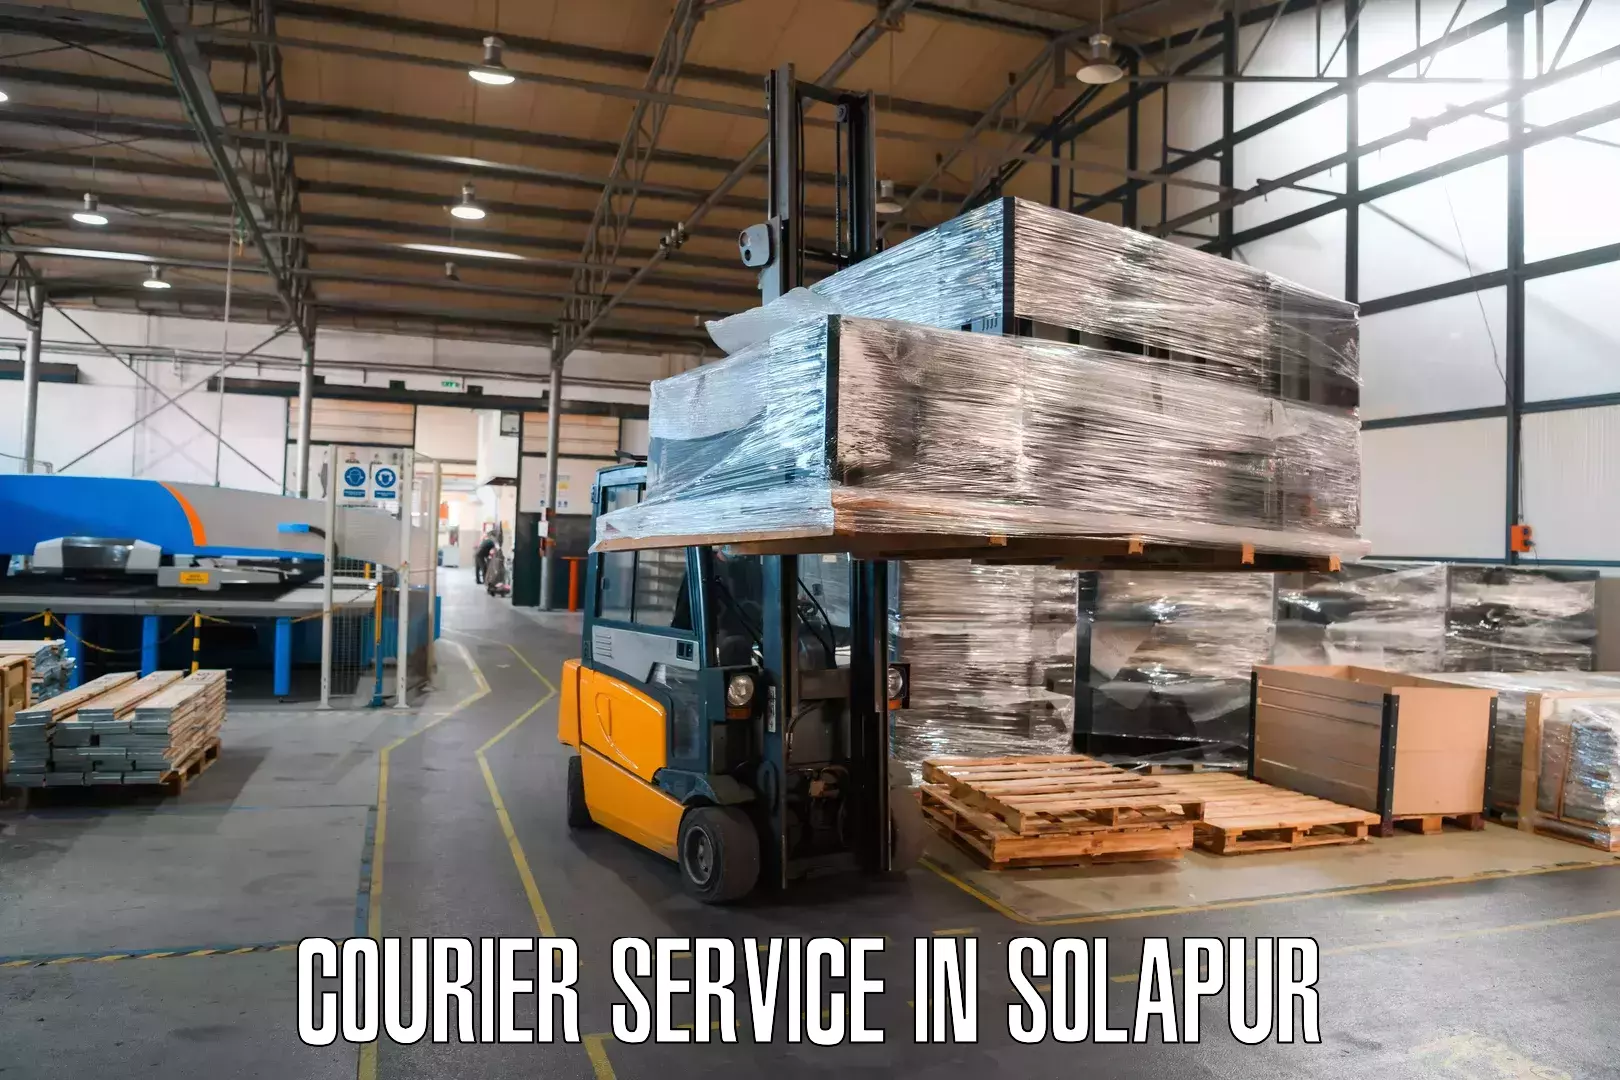 Courier service efficiency in Solapur